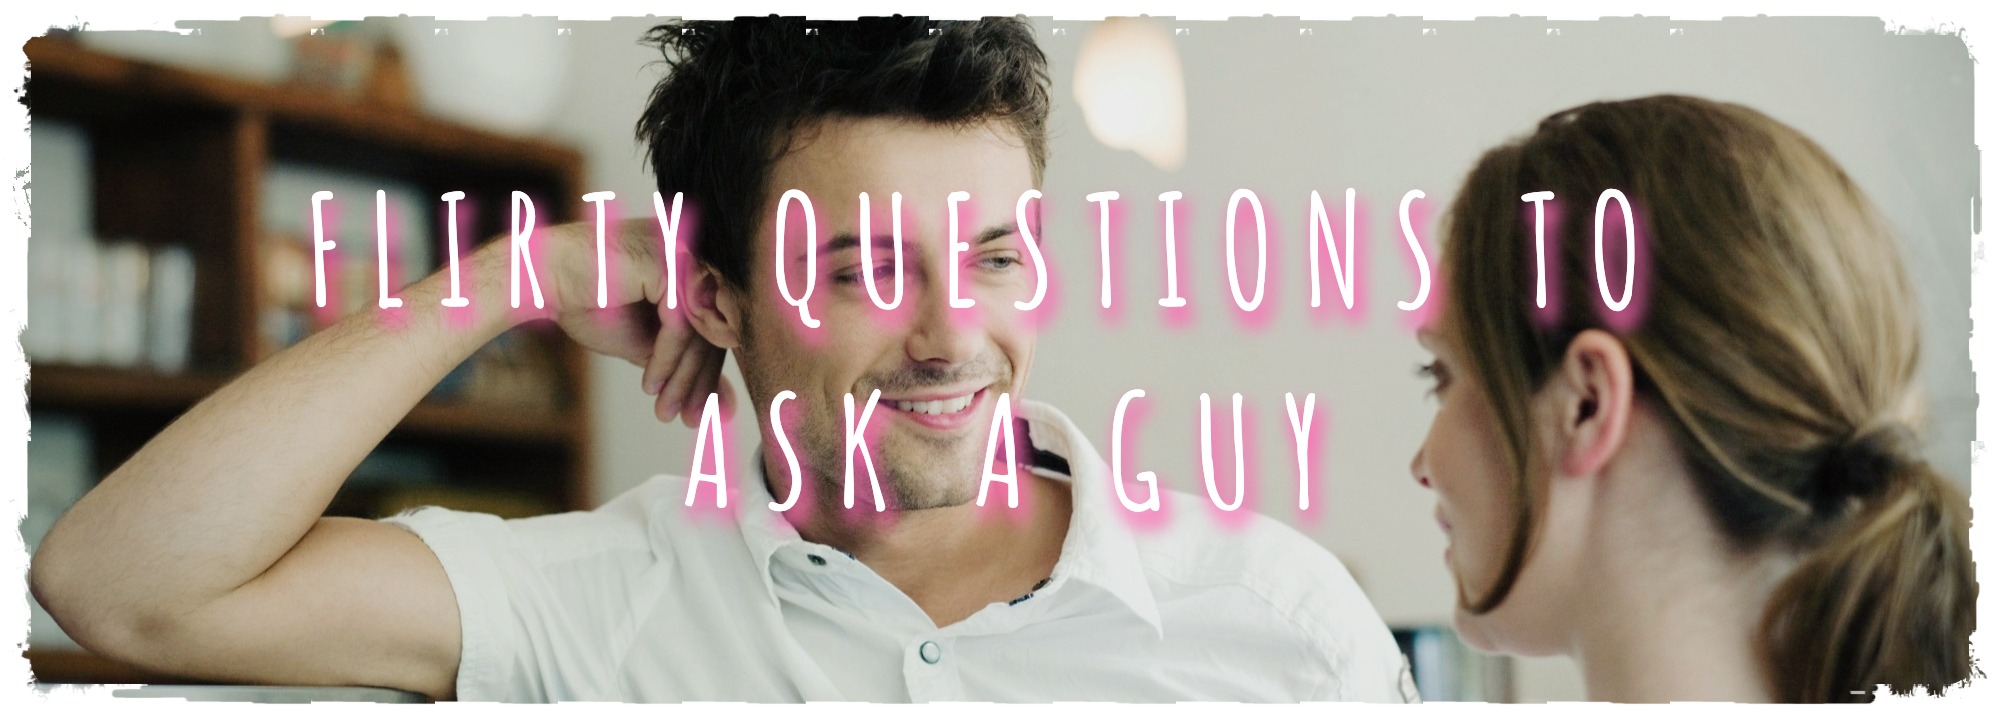 Flirty questions to ask over text